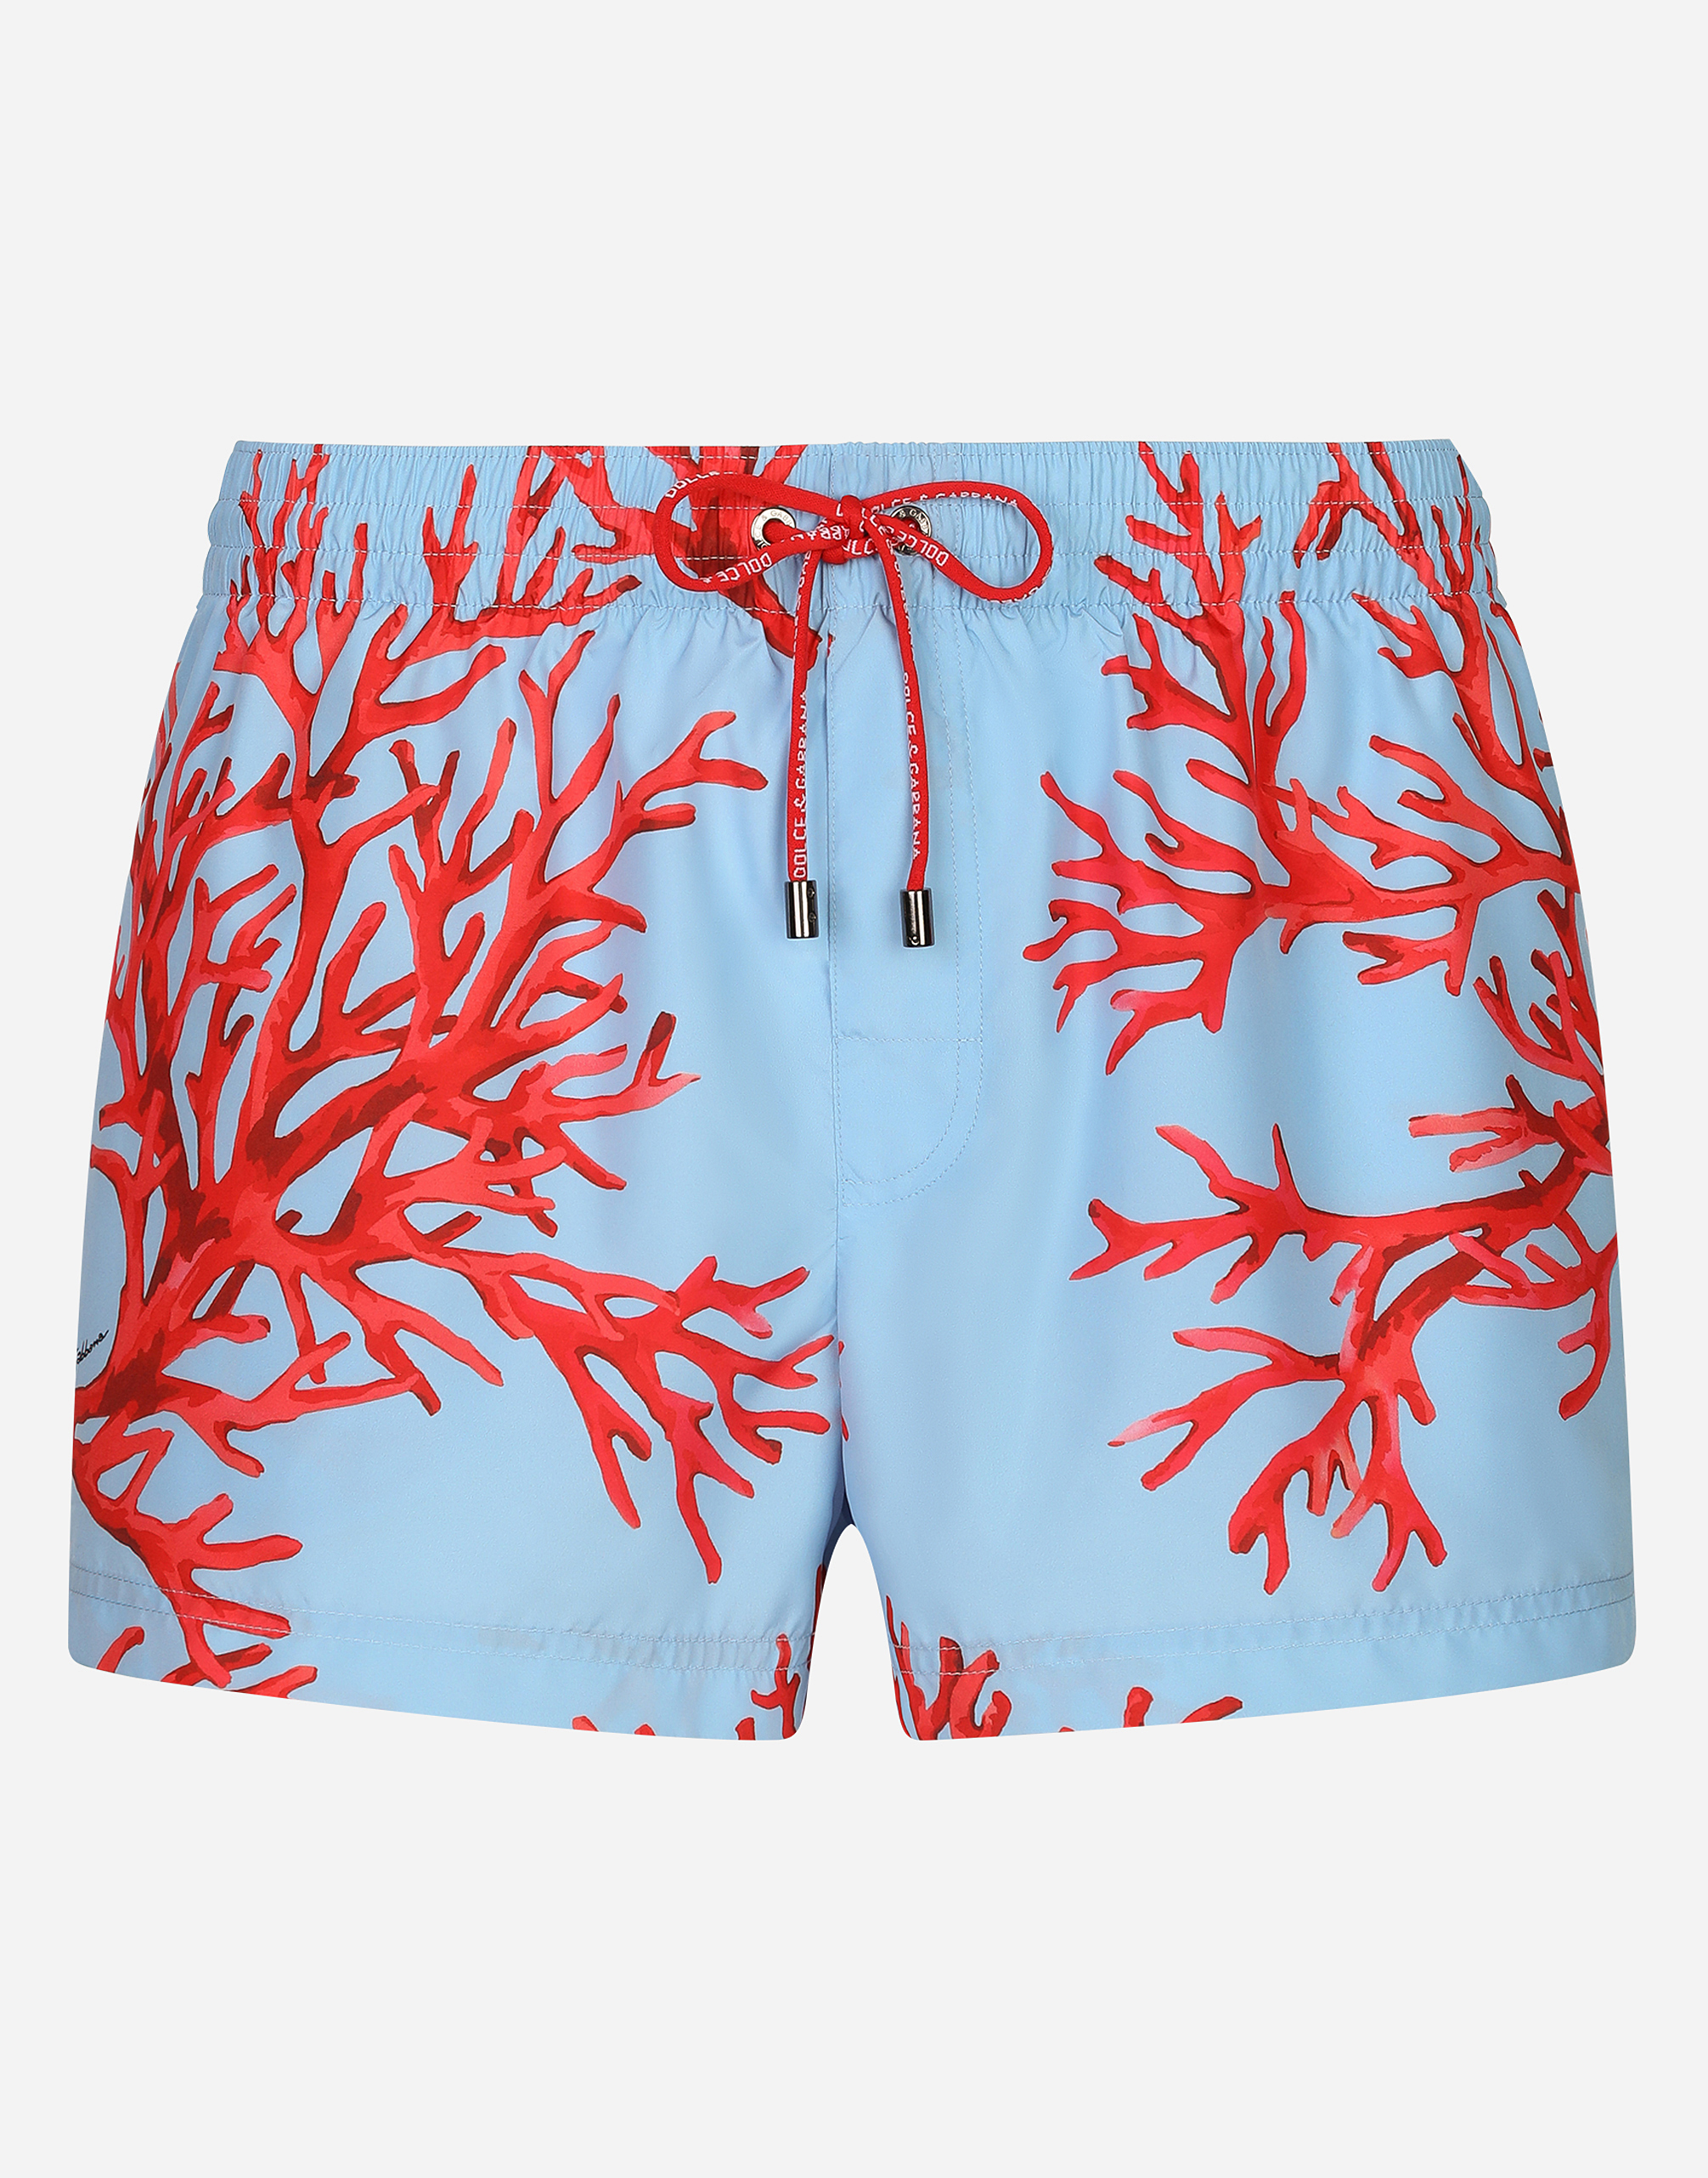 Short swim trunks with coral print in Multicolor